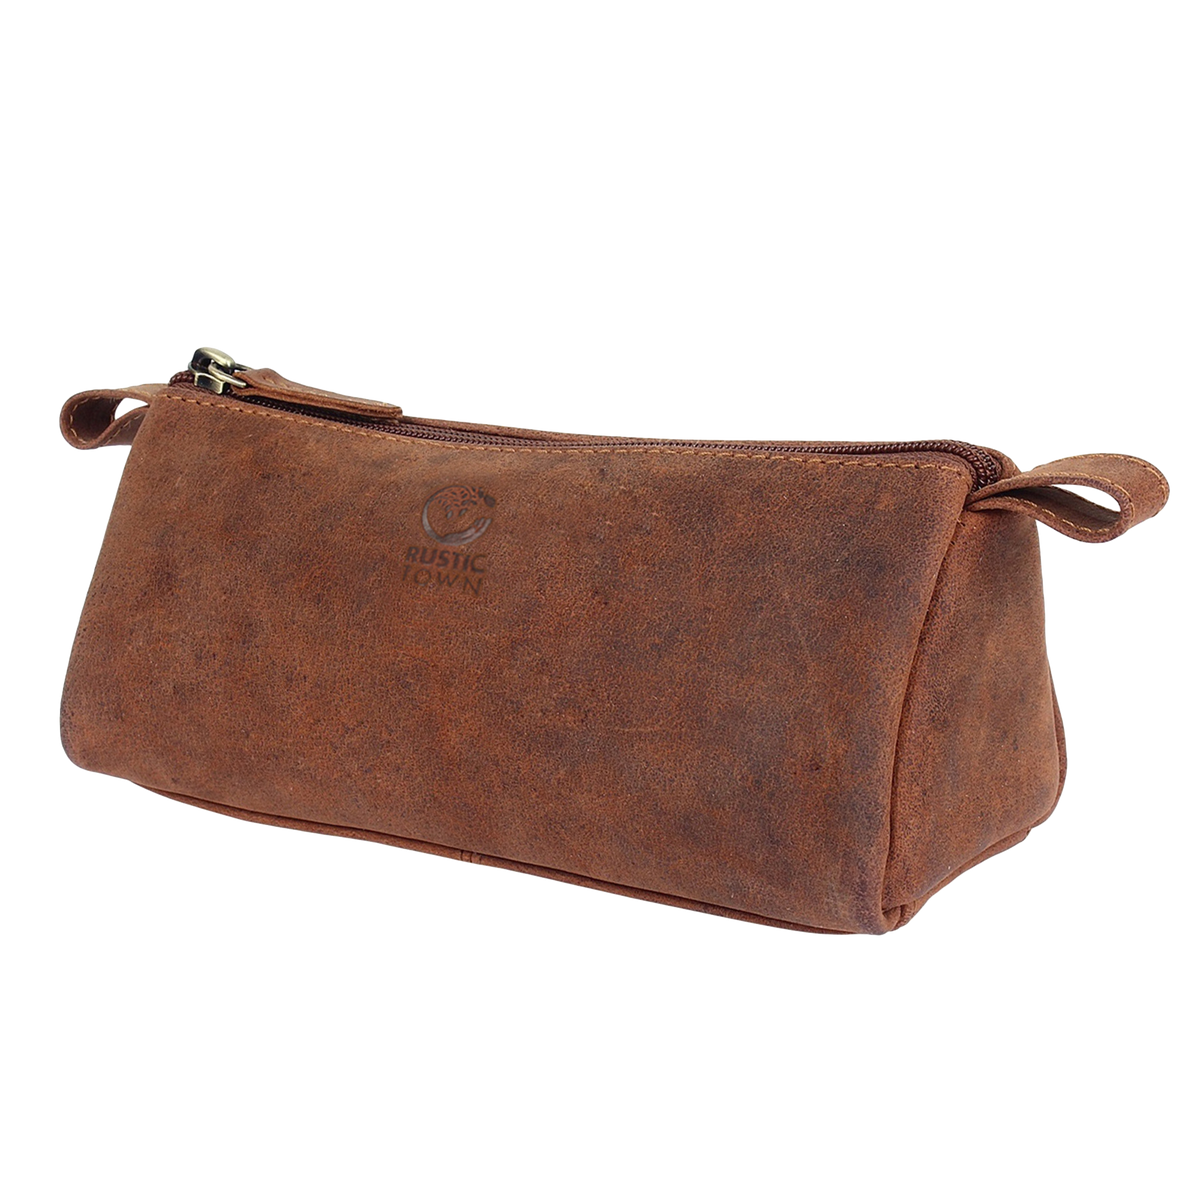 Katie Leamon Small Leather Zip Pencil Case in Brown